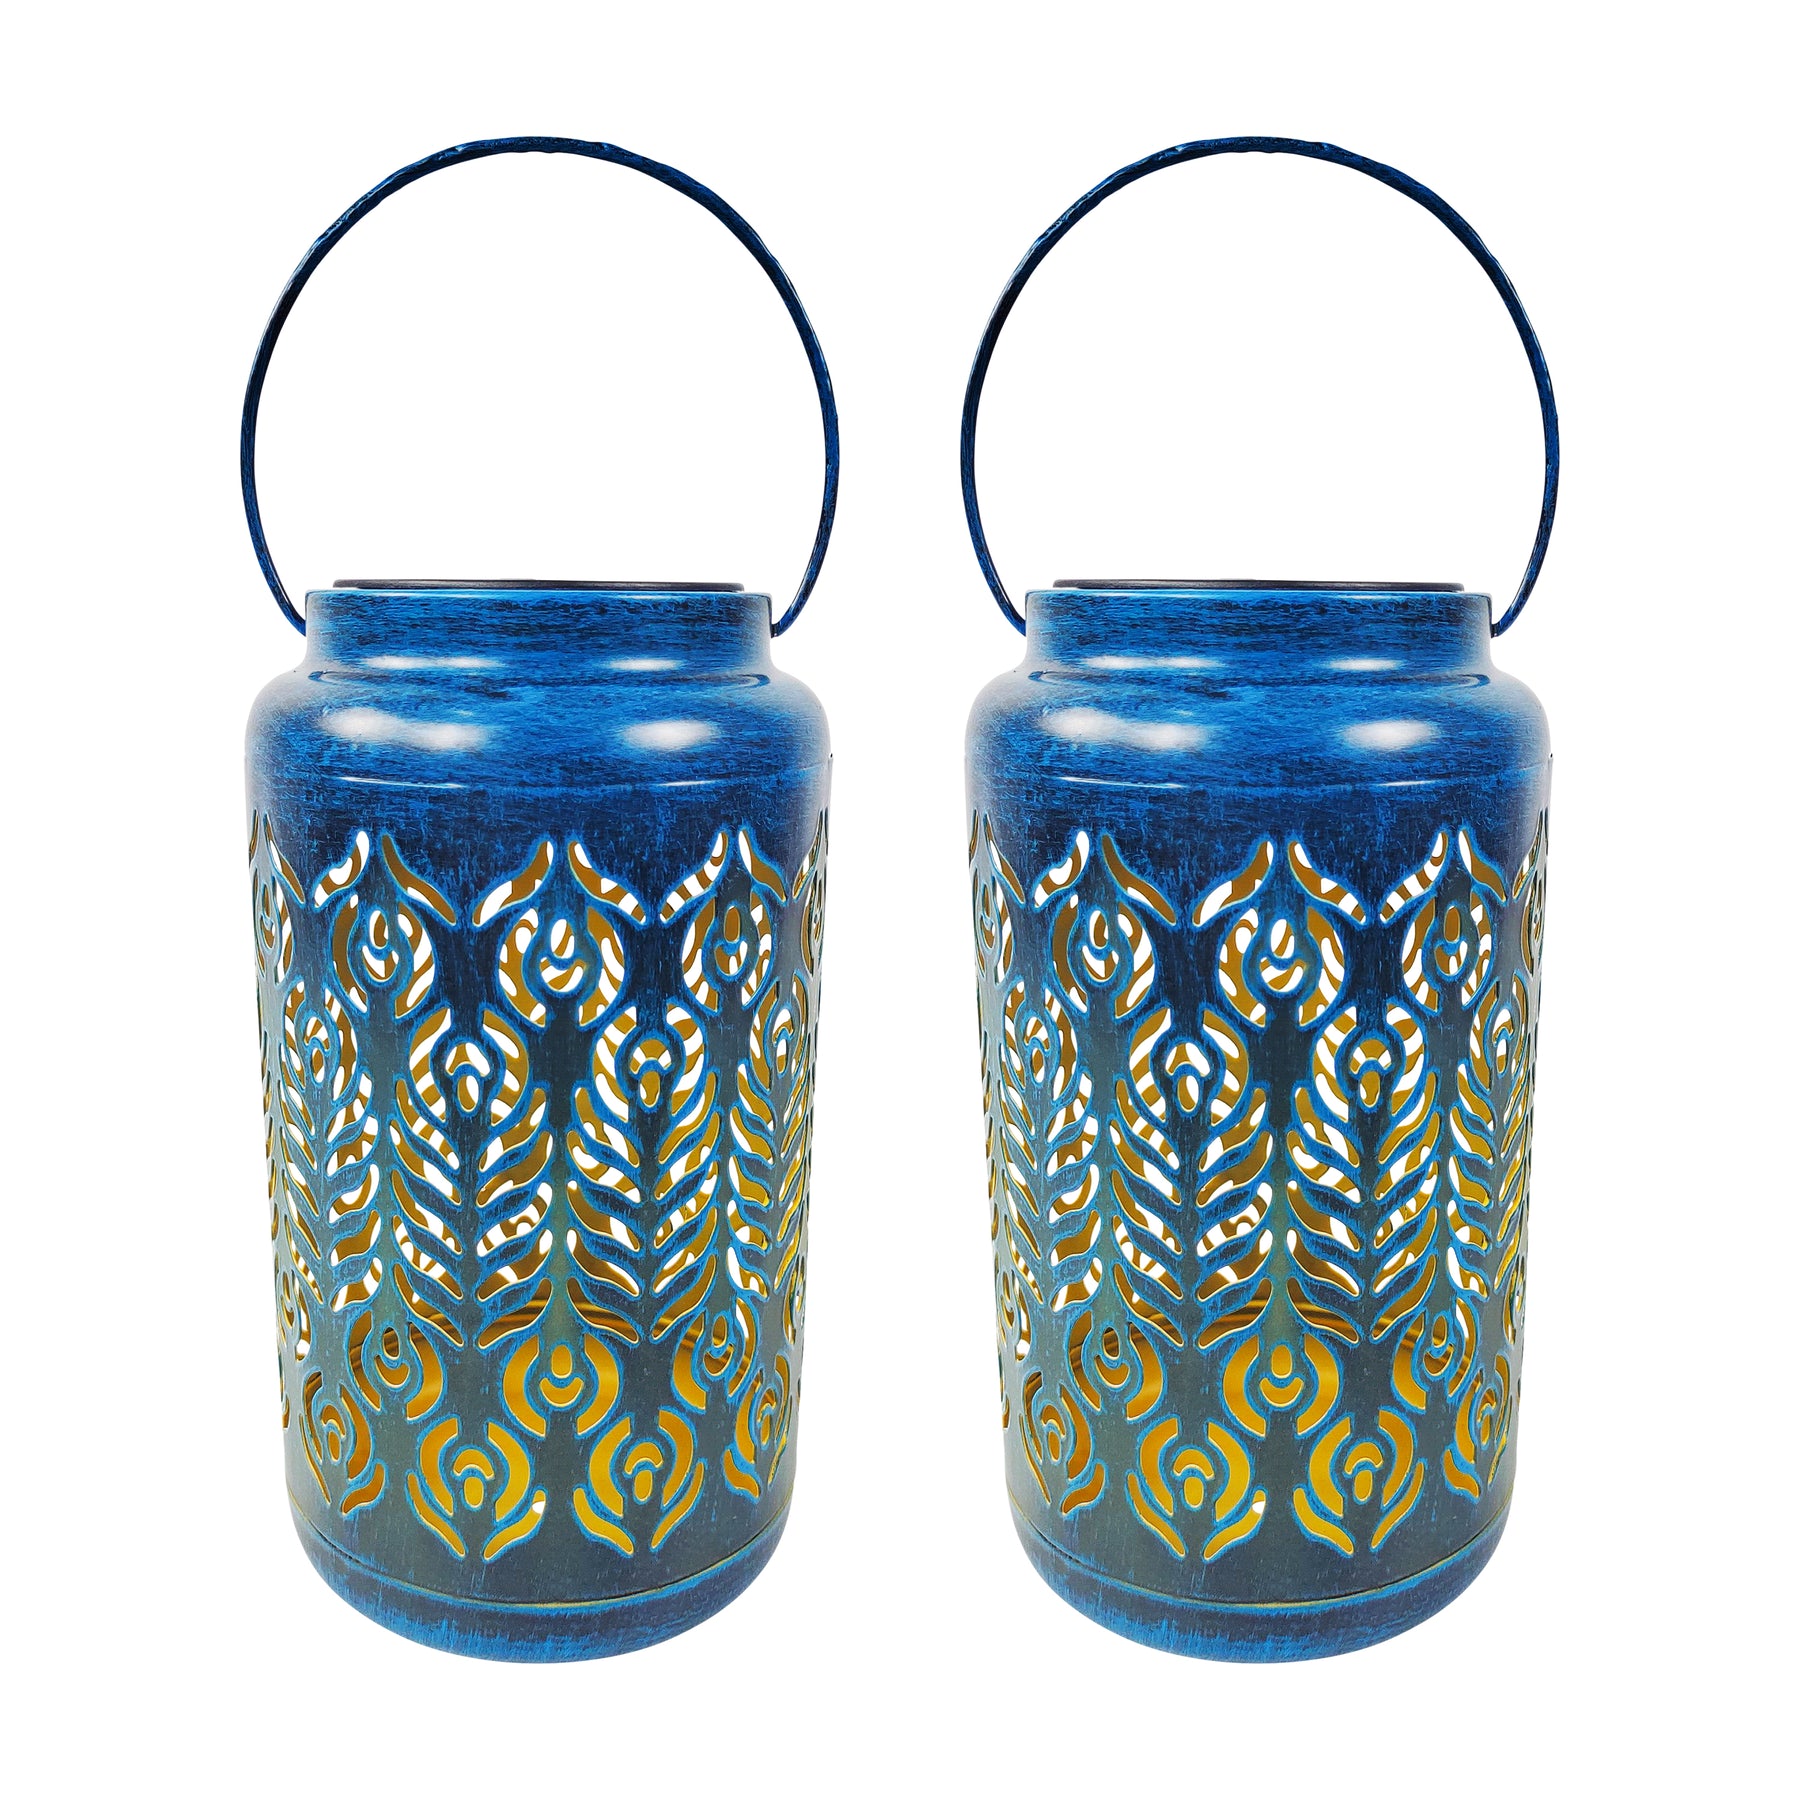 Bliss Outdoors 9-inch Tall 2-Pack Hanging and Tabletop Decorative Solar LED Lantern with Unique Phoenix Feather Design and Antique Hand Painted Finish in the Brushed Blue variation.